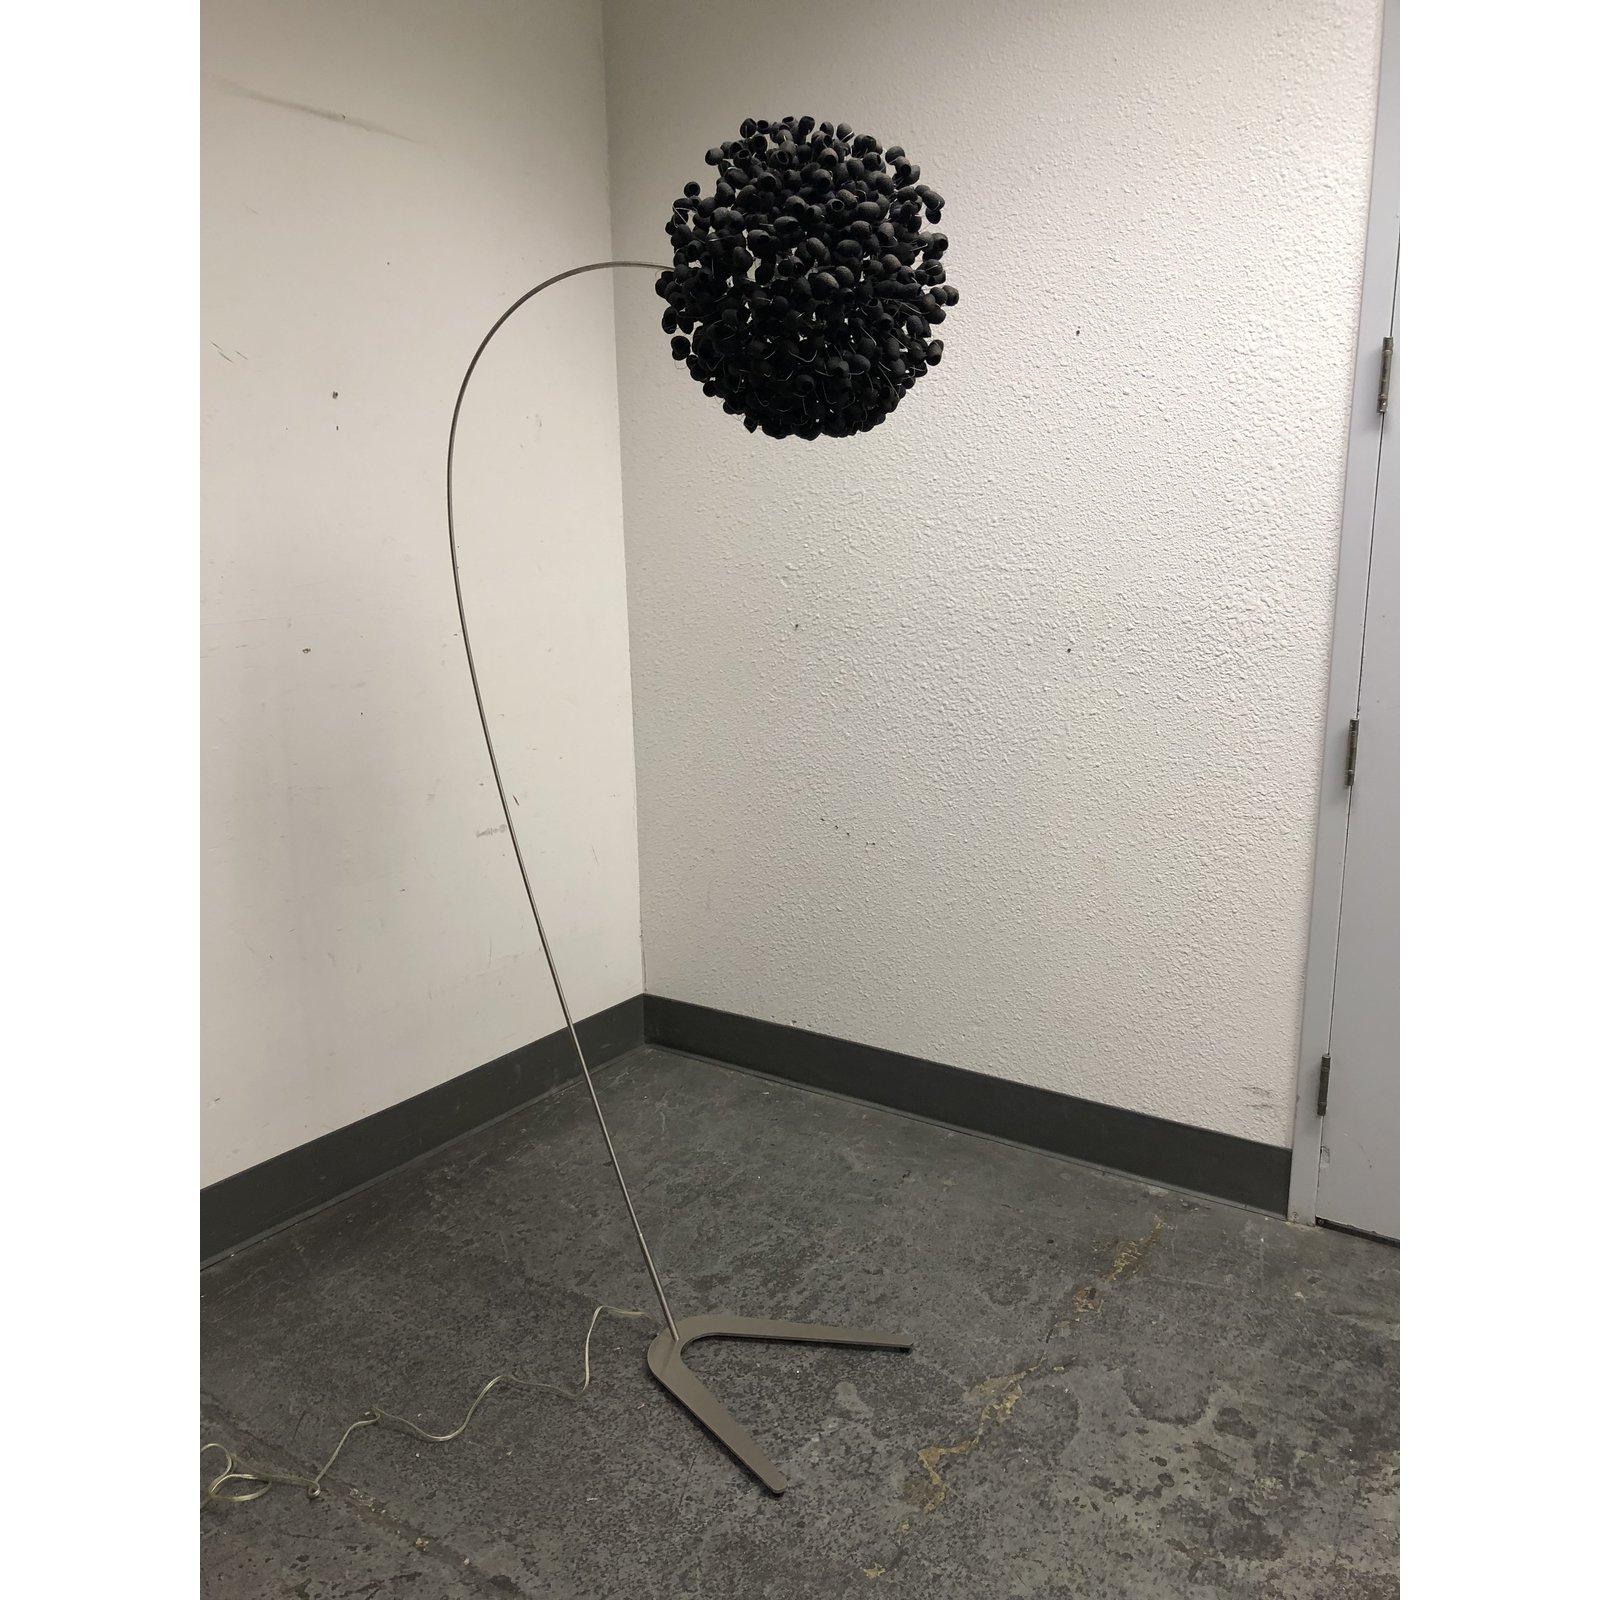 A Chrysalis Sky black floor lamp by Ango. This stunning floor lamp evocative of a dandelion in bloom, will bring a striking and enchanting look to any room in your home. The stainless steel metal base is slightly curved with a globe shaped shade